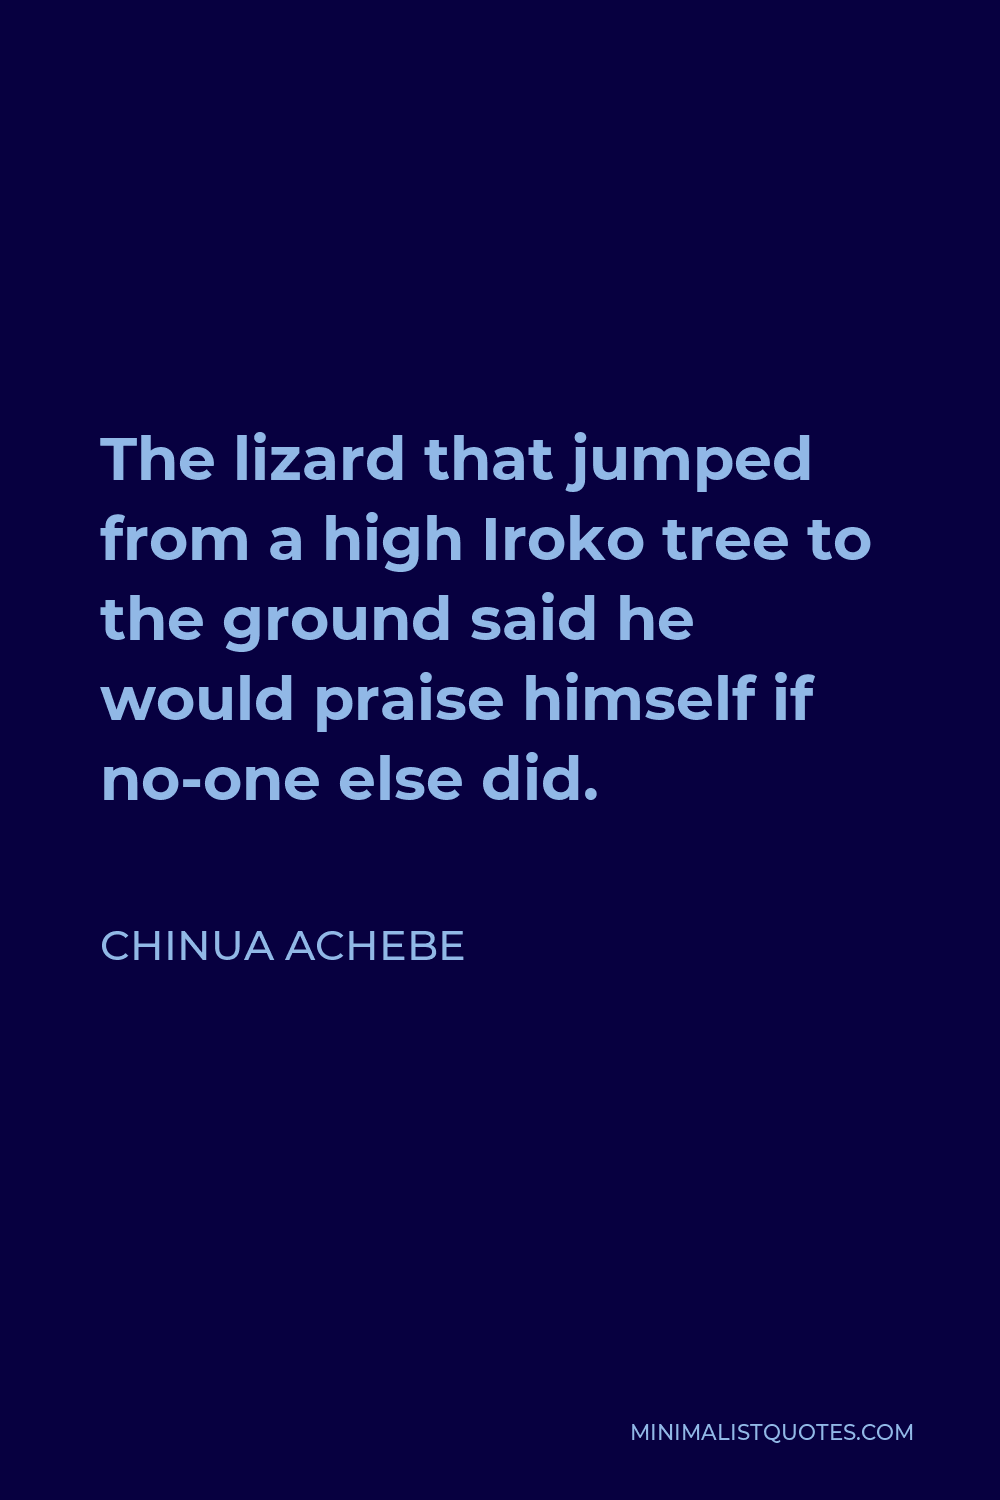 Chinua Achebe Quote - The lizard that jumped from a high Iroko tree to the ground said he would praise himself if no-one else did.